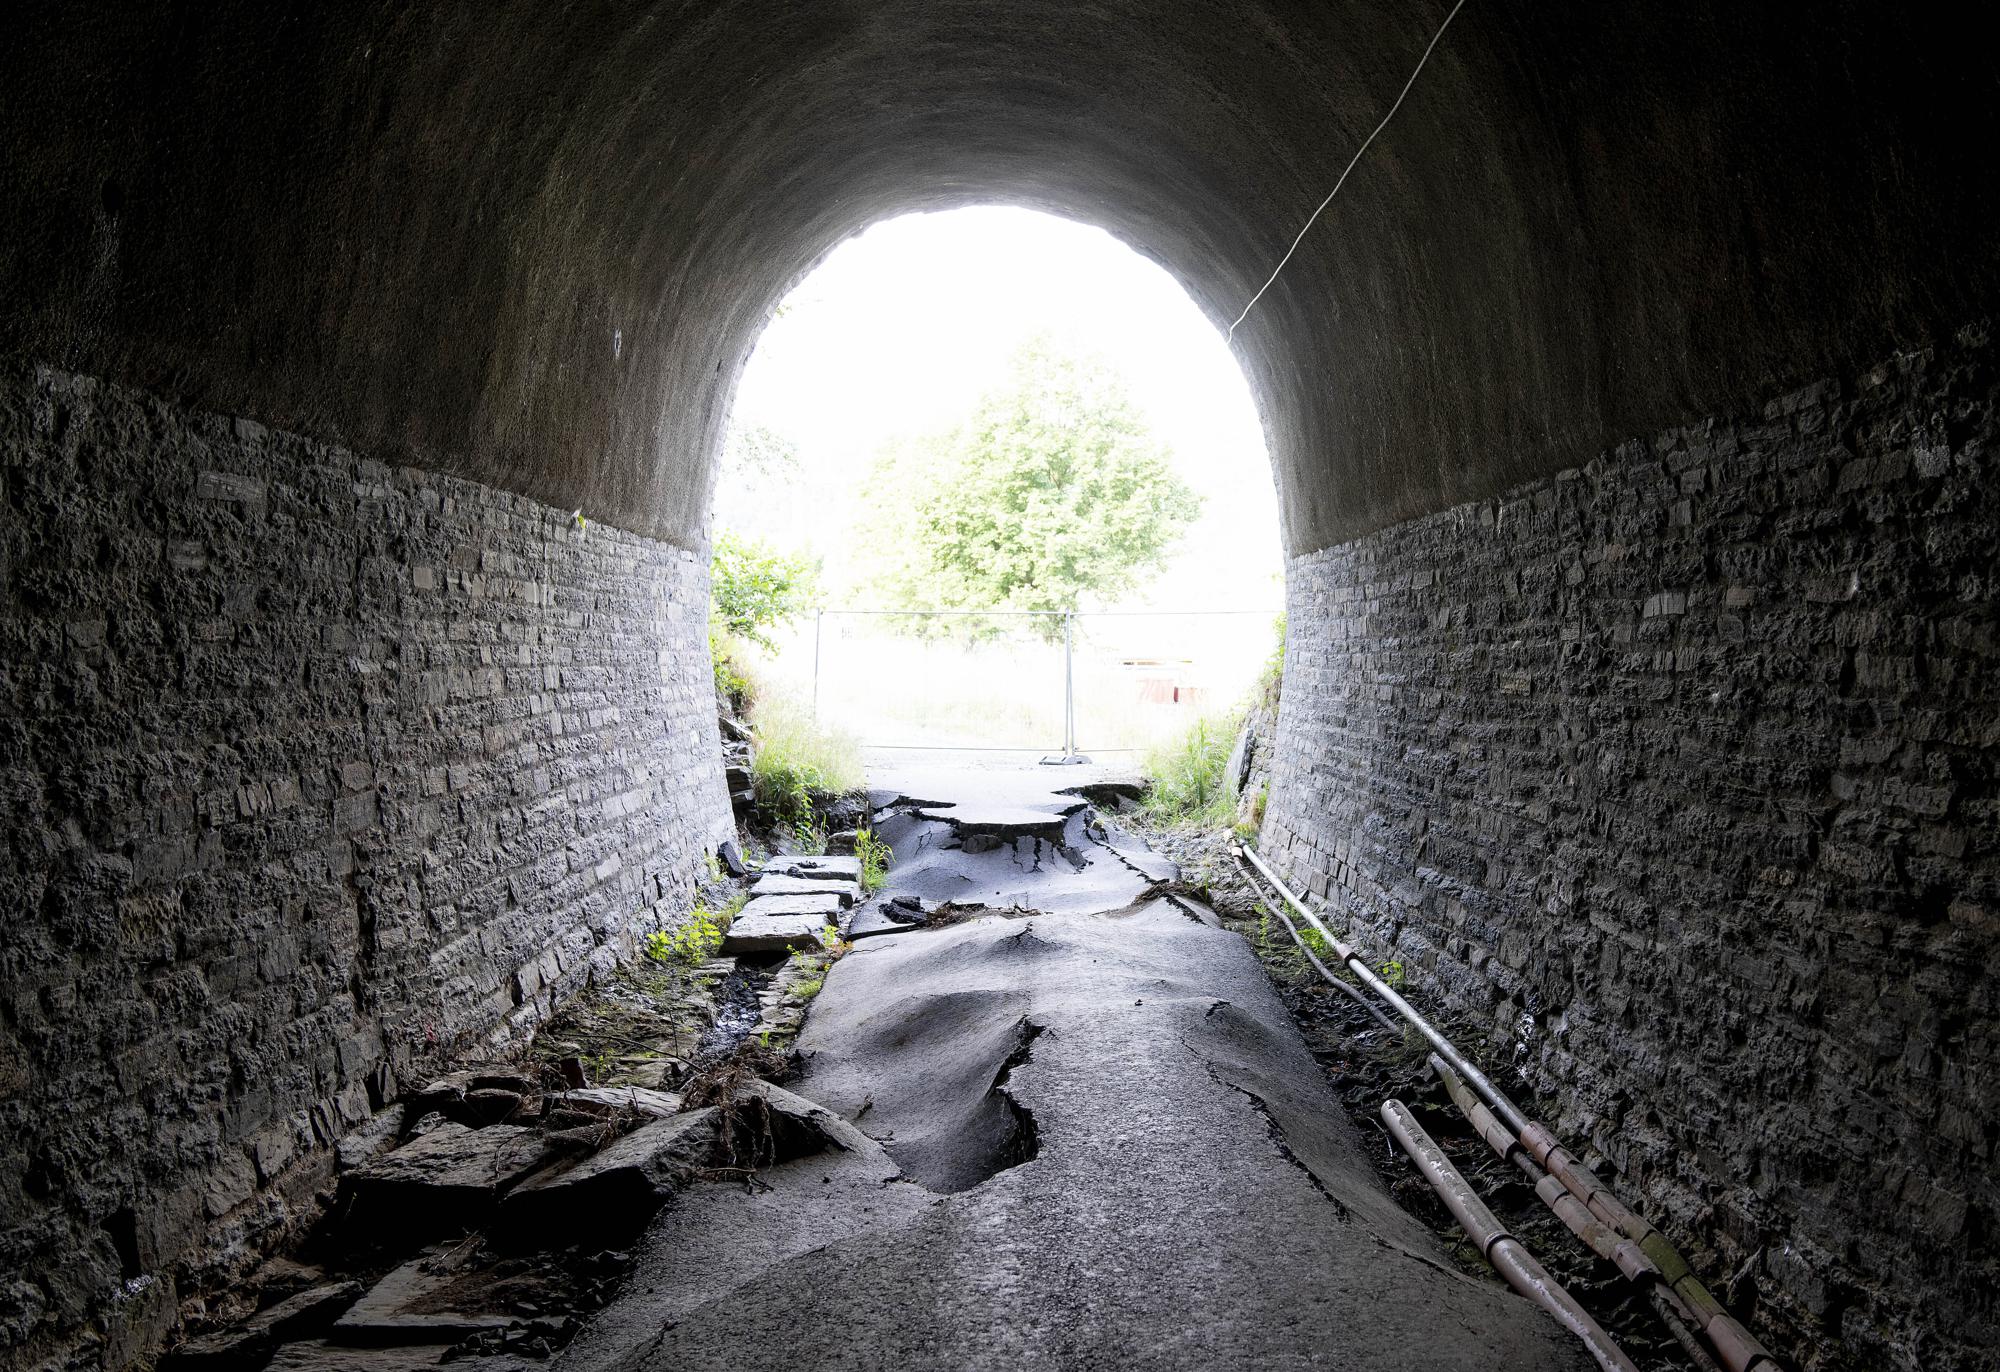 A flood damaged bicycle path goes through a tunnel near the village of Laach in the Ahrtal valley, Germany, Tuesday, July 6, 2022. Flooding caused by heavy rain hit the region on July 14, 2021, causing the death of about 130 people. (AP Photo/Michael Probst)